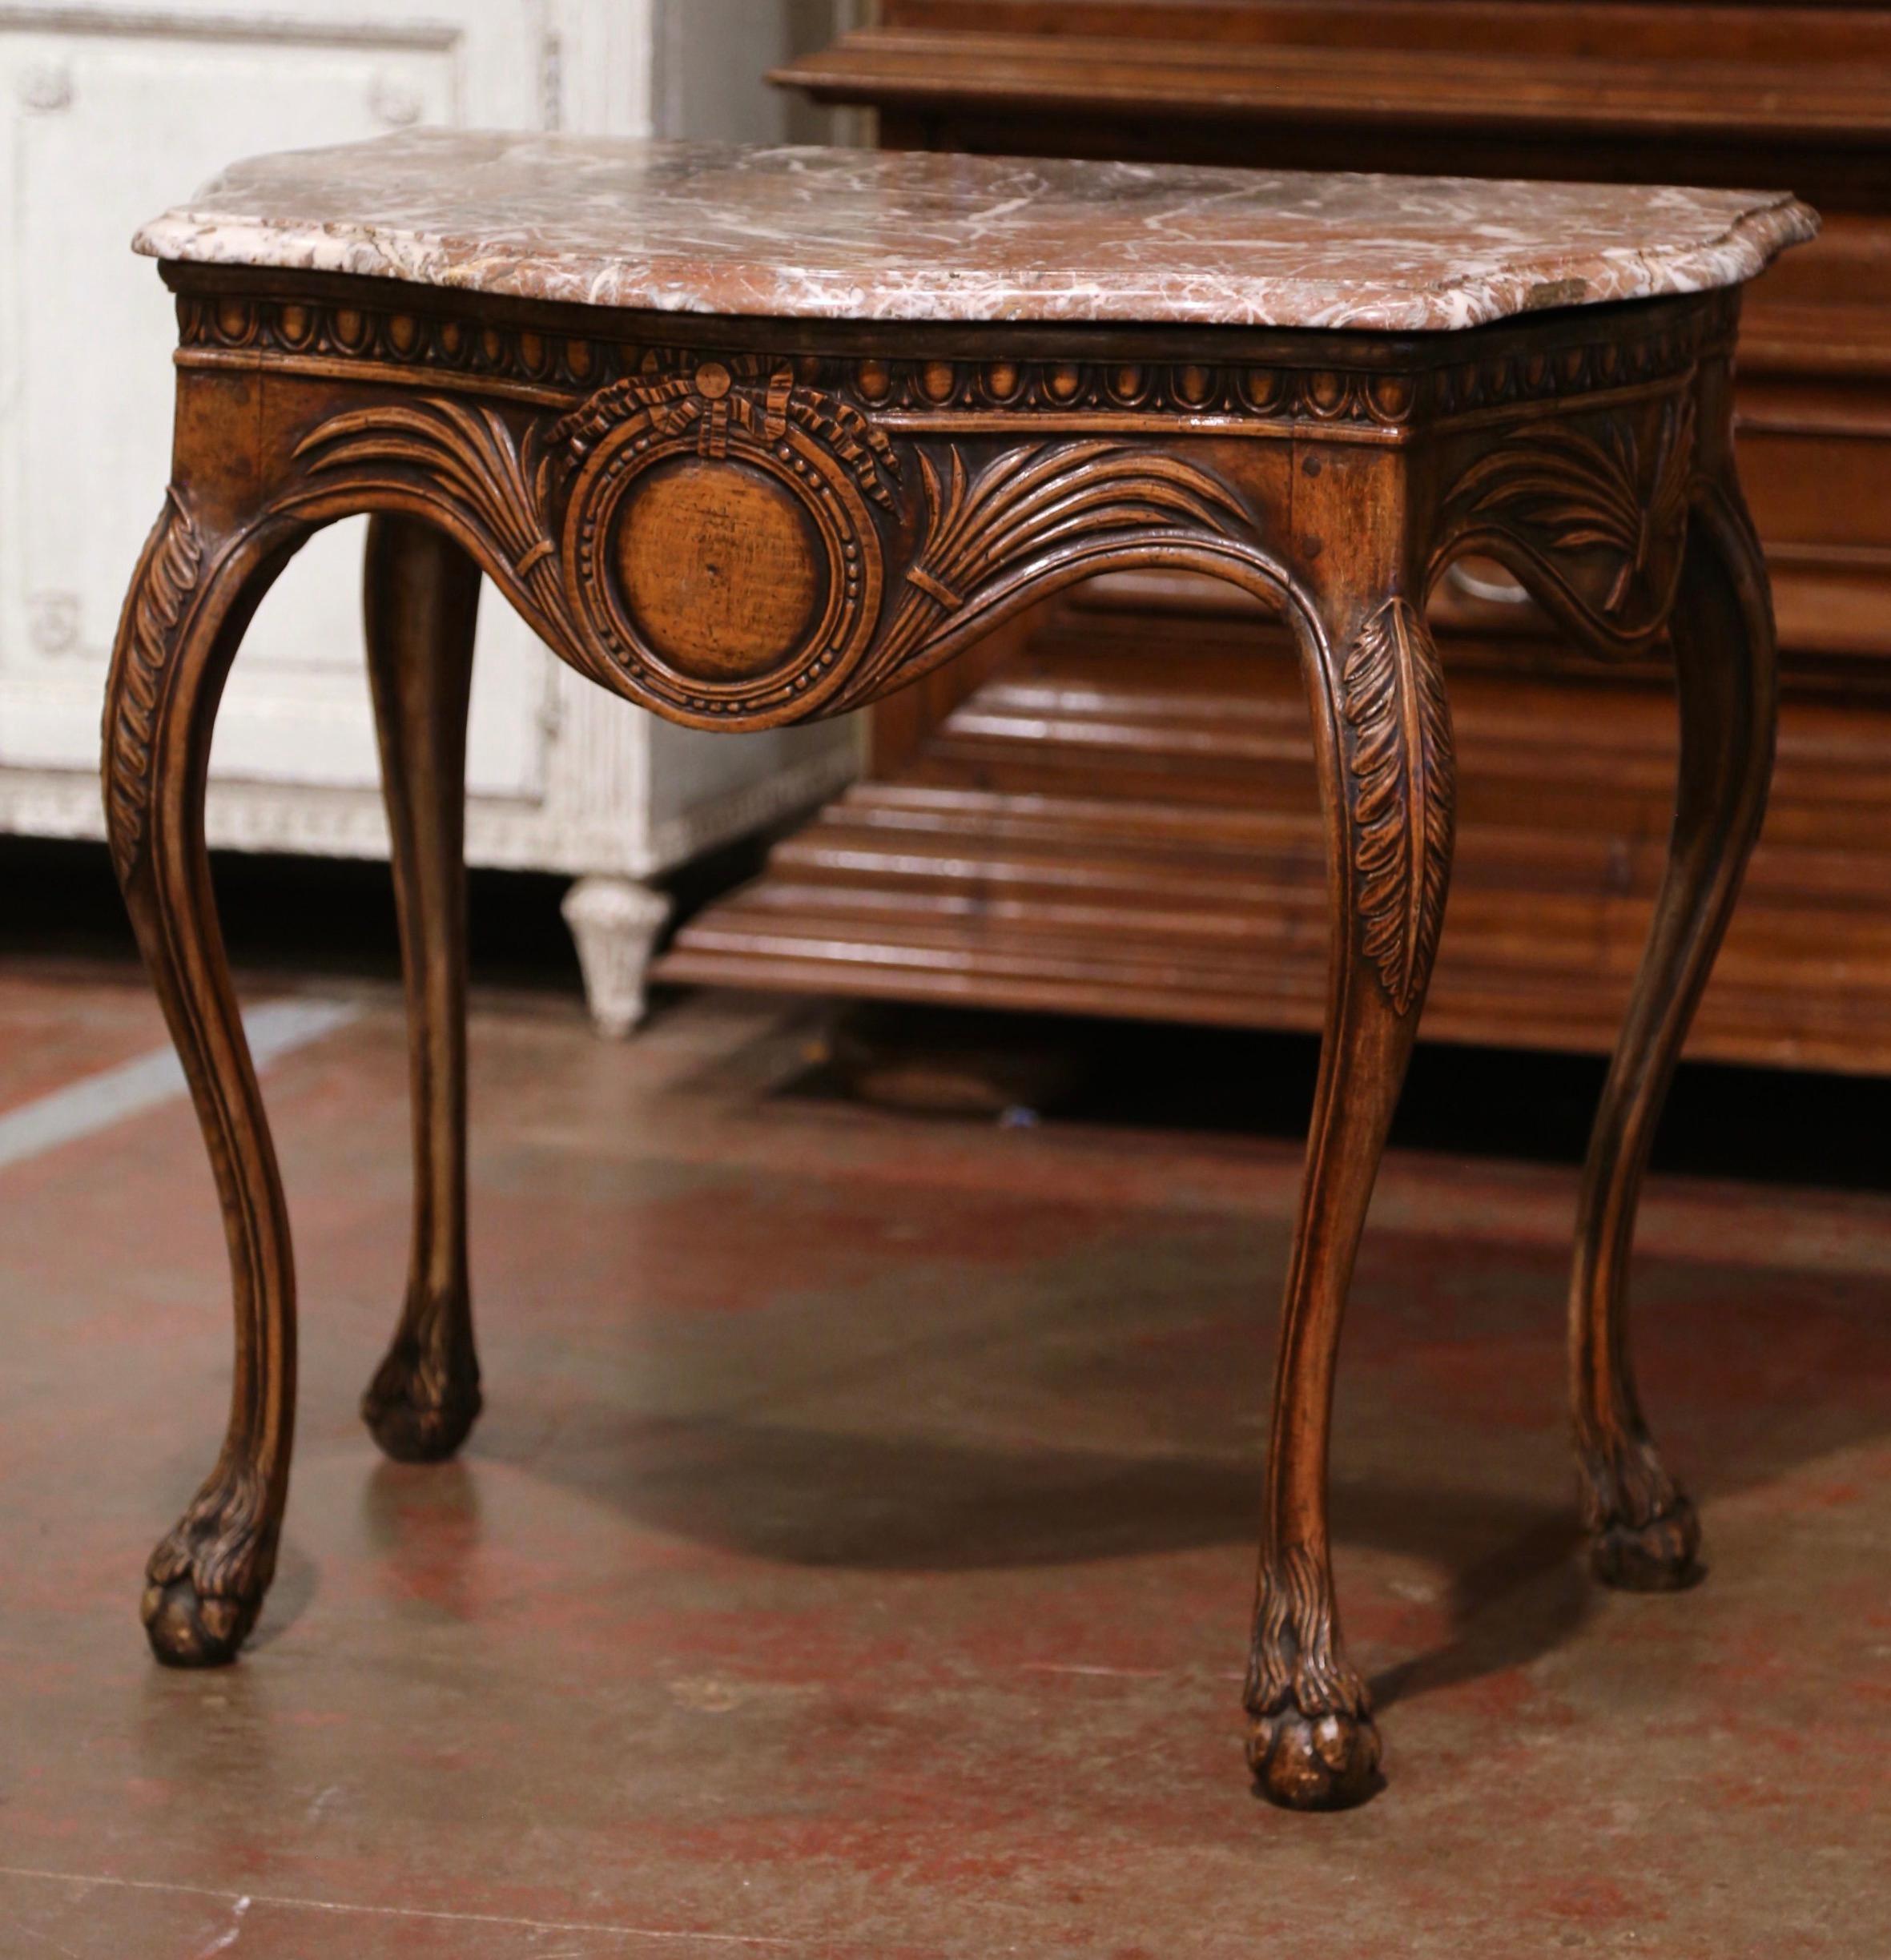 18th Century French Louis XV Provencal Carved Walnut and Marble Console Table For Sale 1